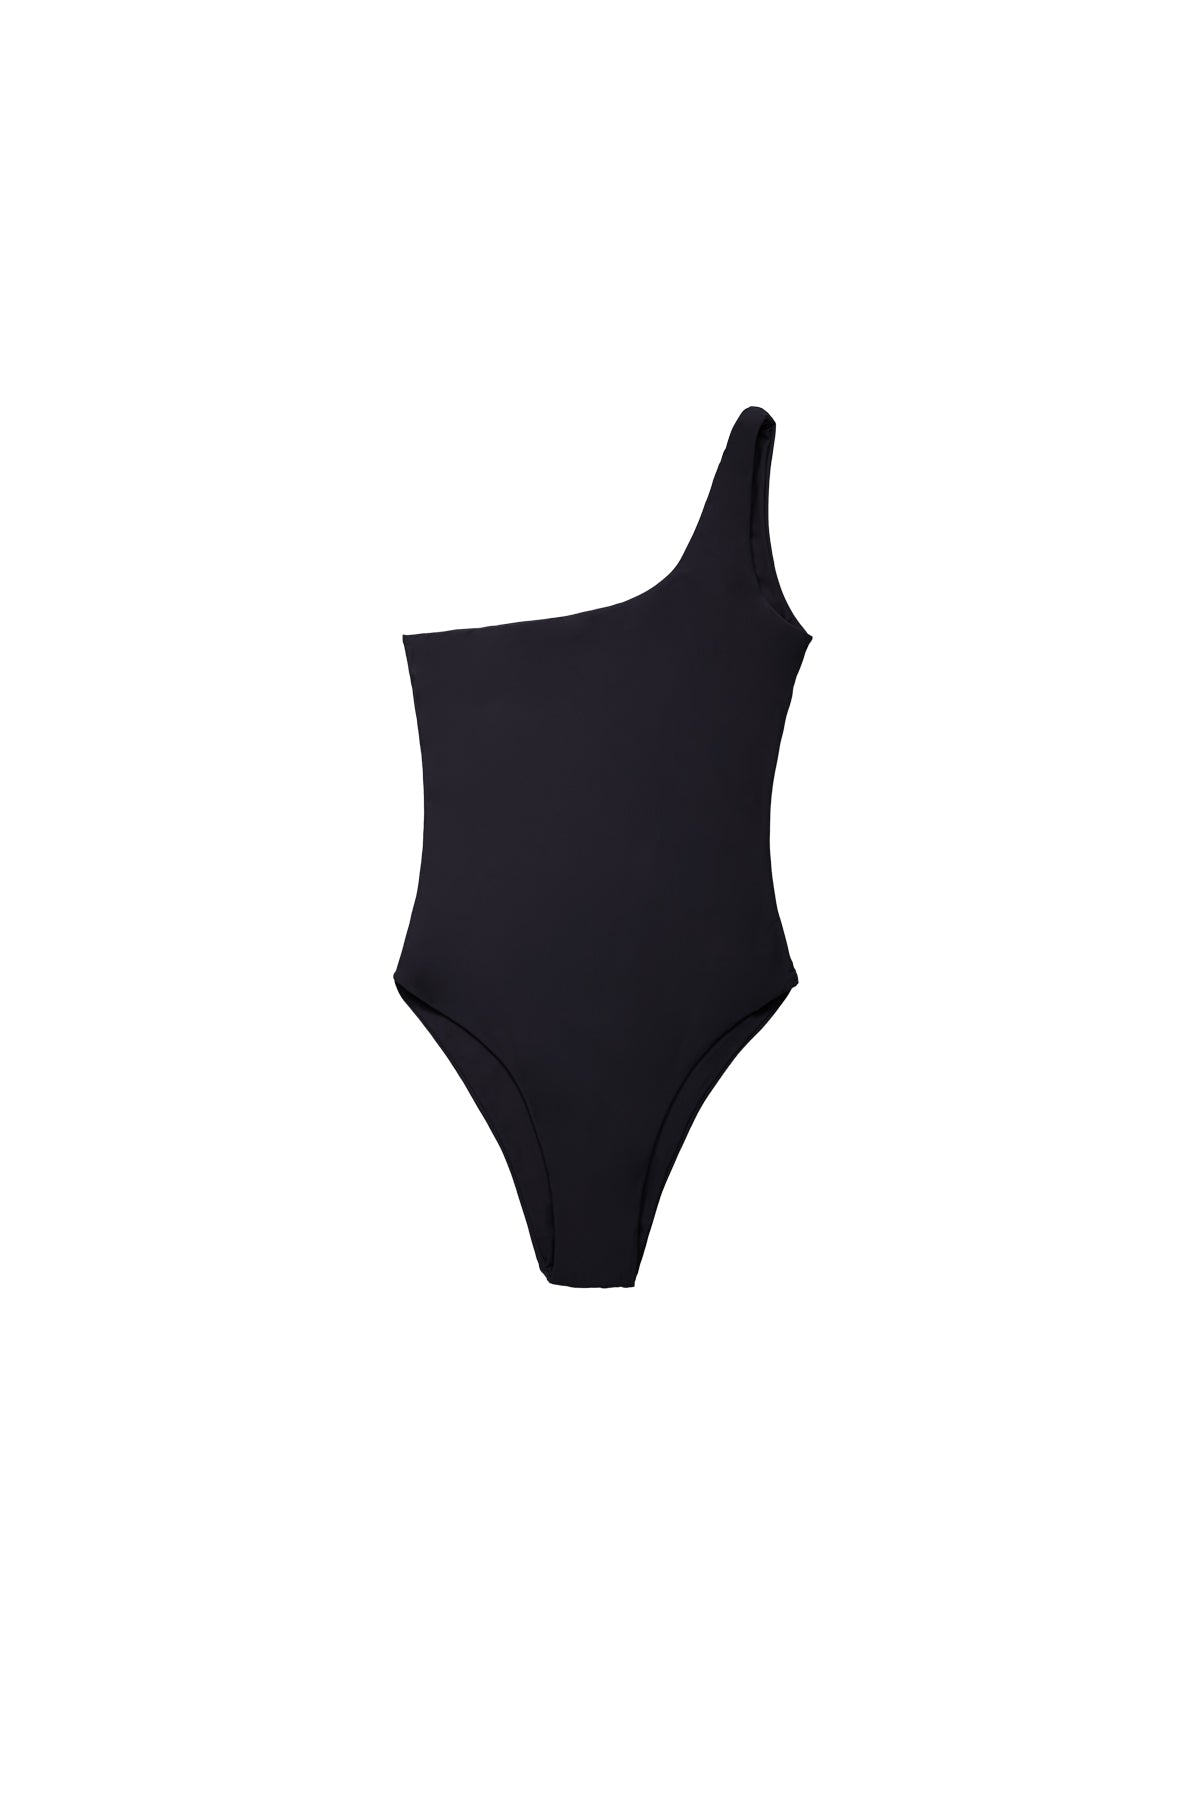 The Timeless One Piece Black